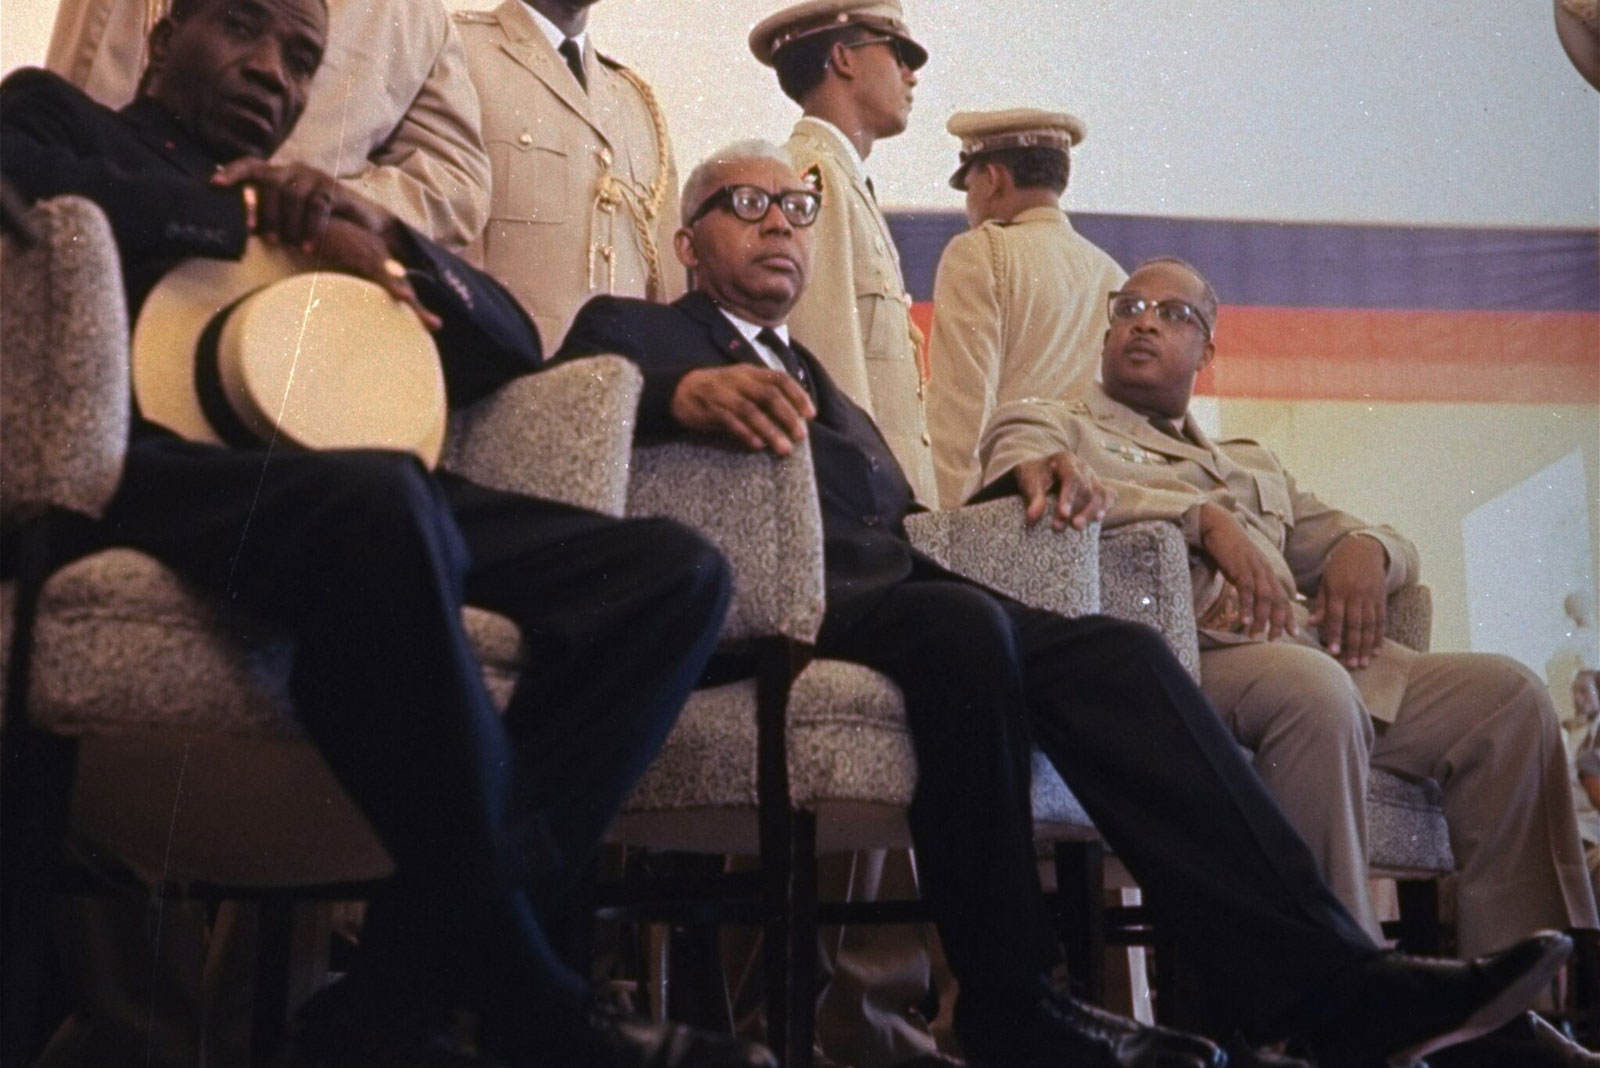 François Duvalier, the dictator known as “Papa Doc,” seated at center in 1963.